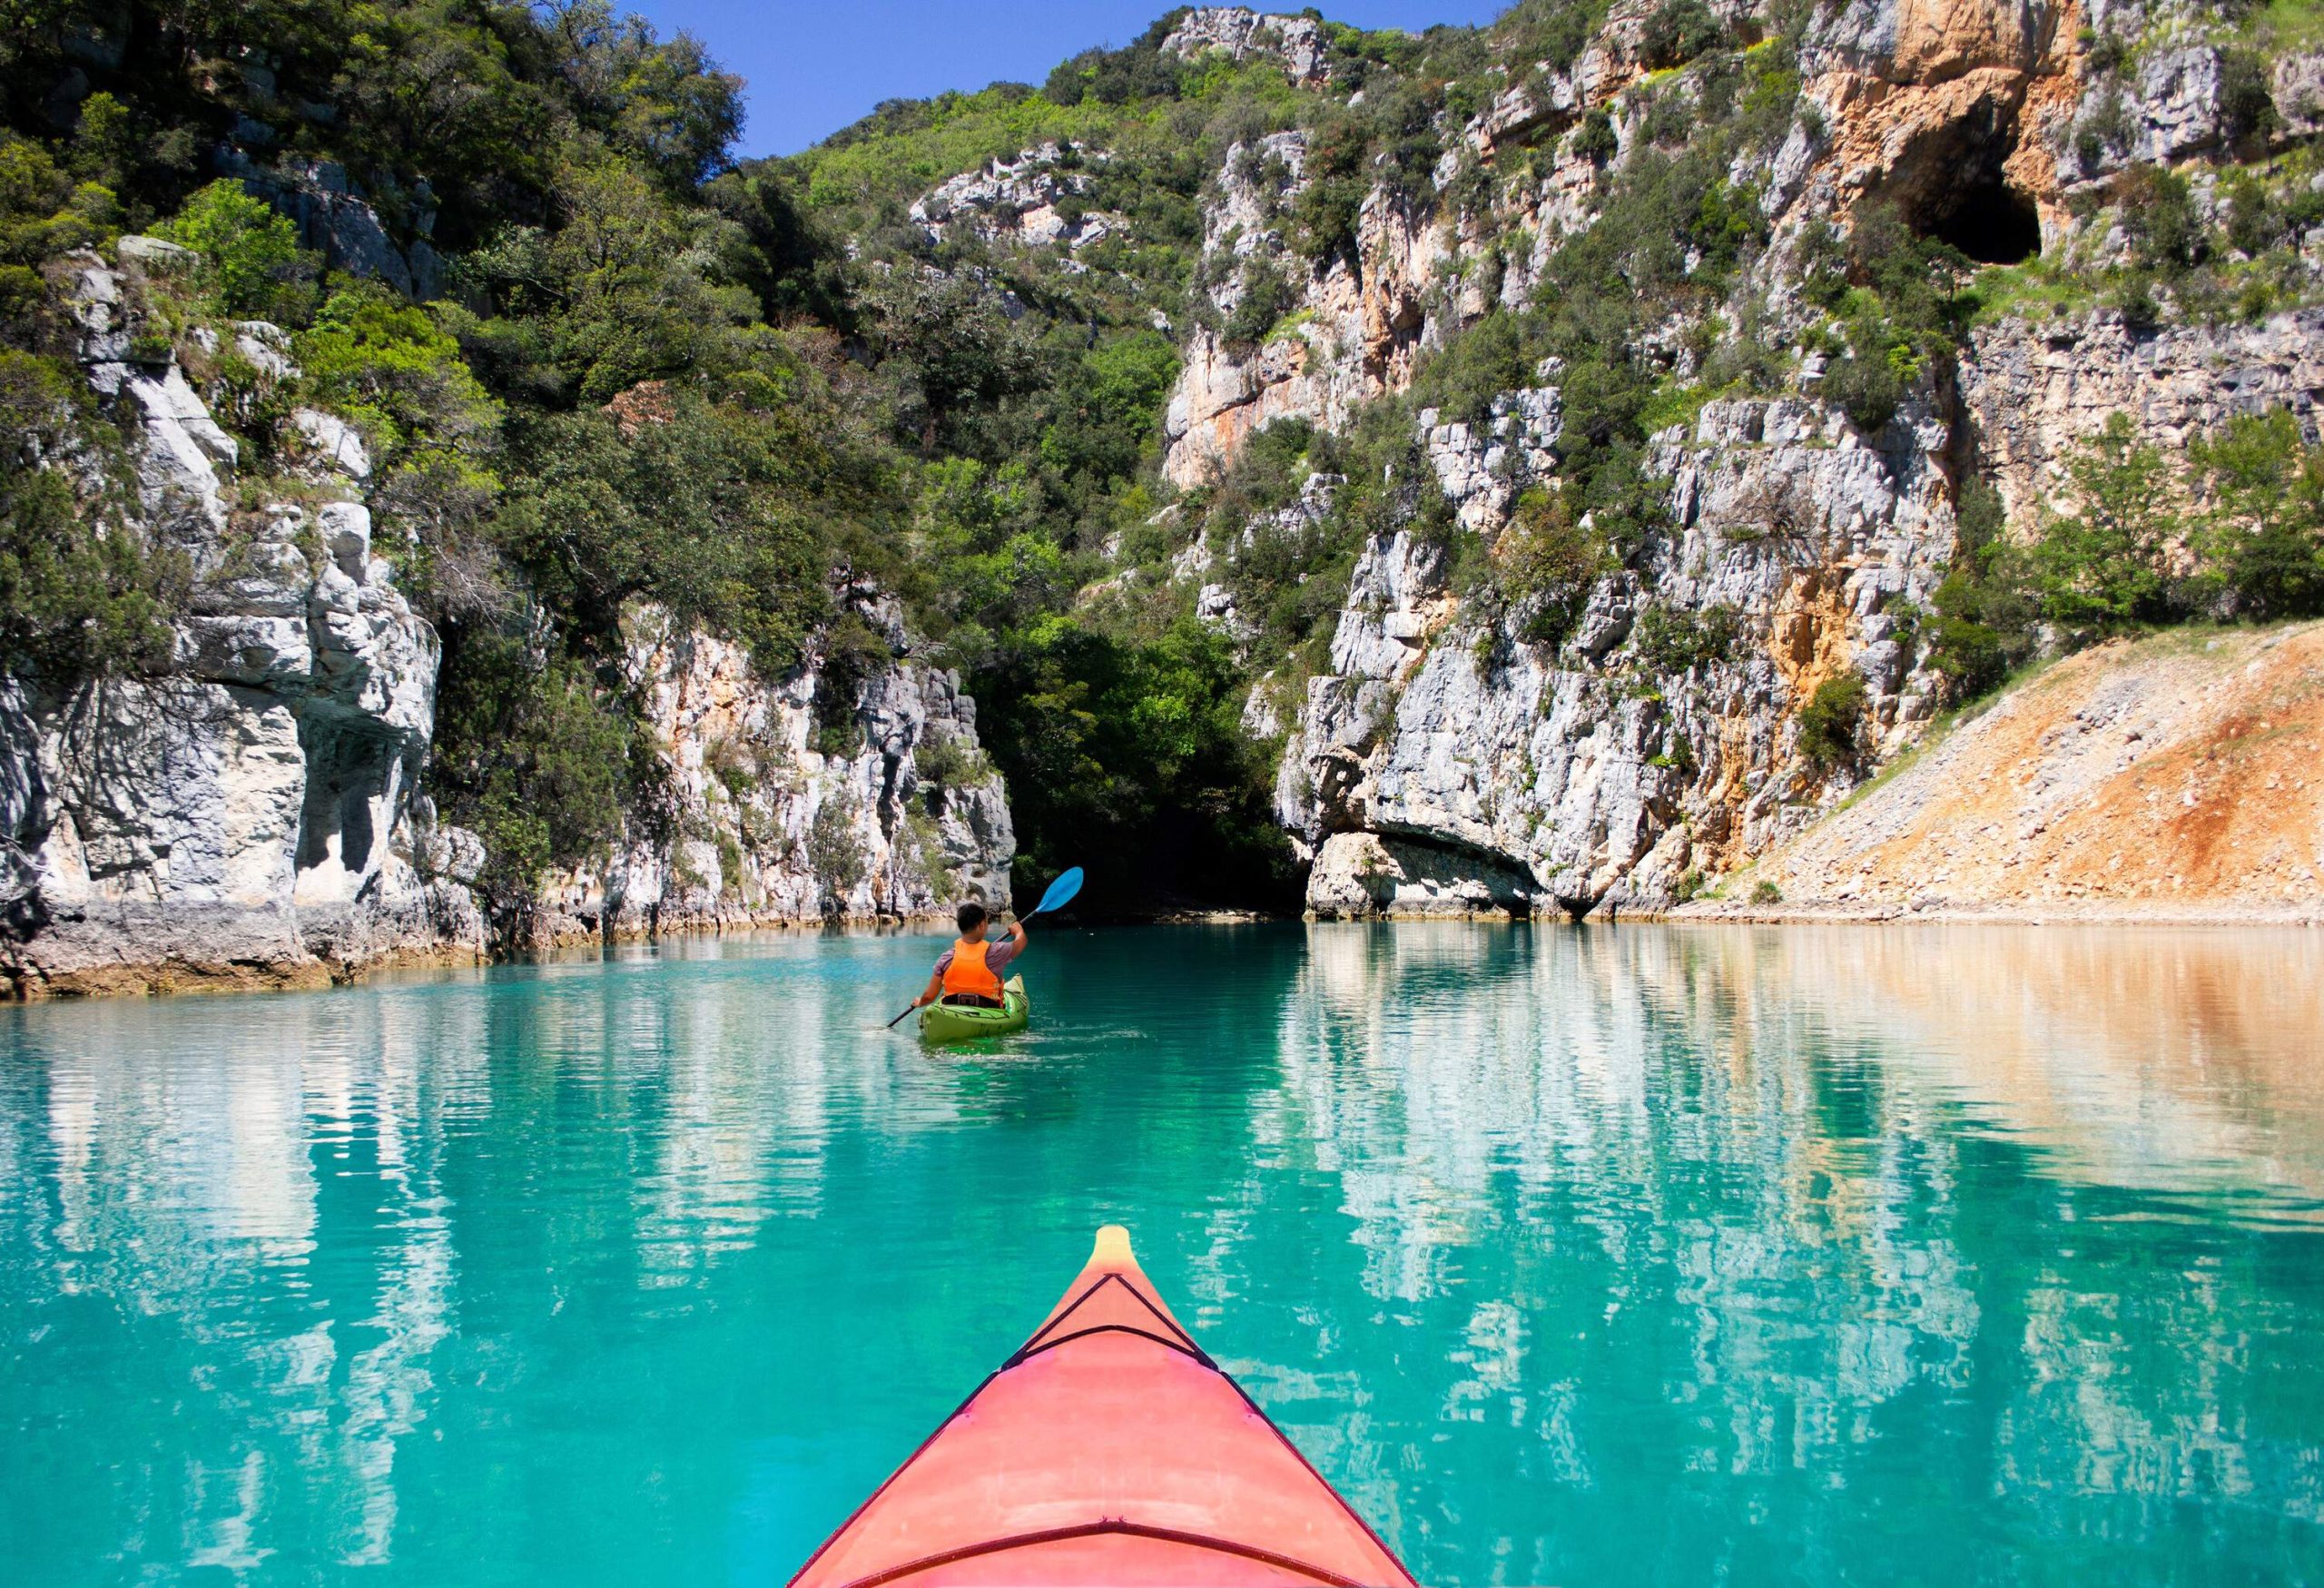 A group of kayakers paddles across a tranquil turquoise river in a gorge covered in vegetation.